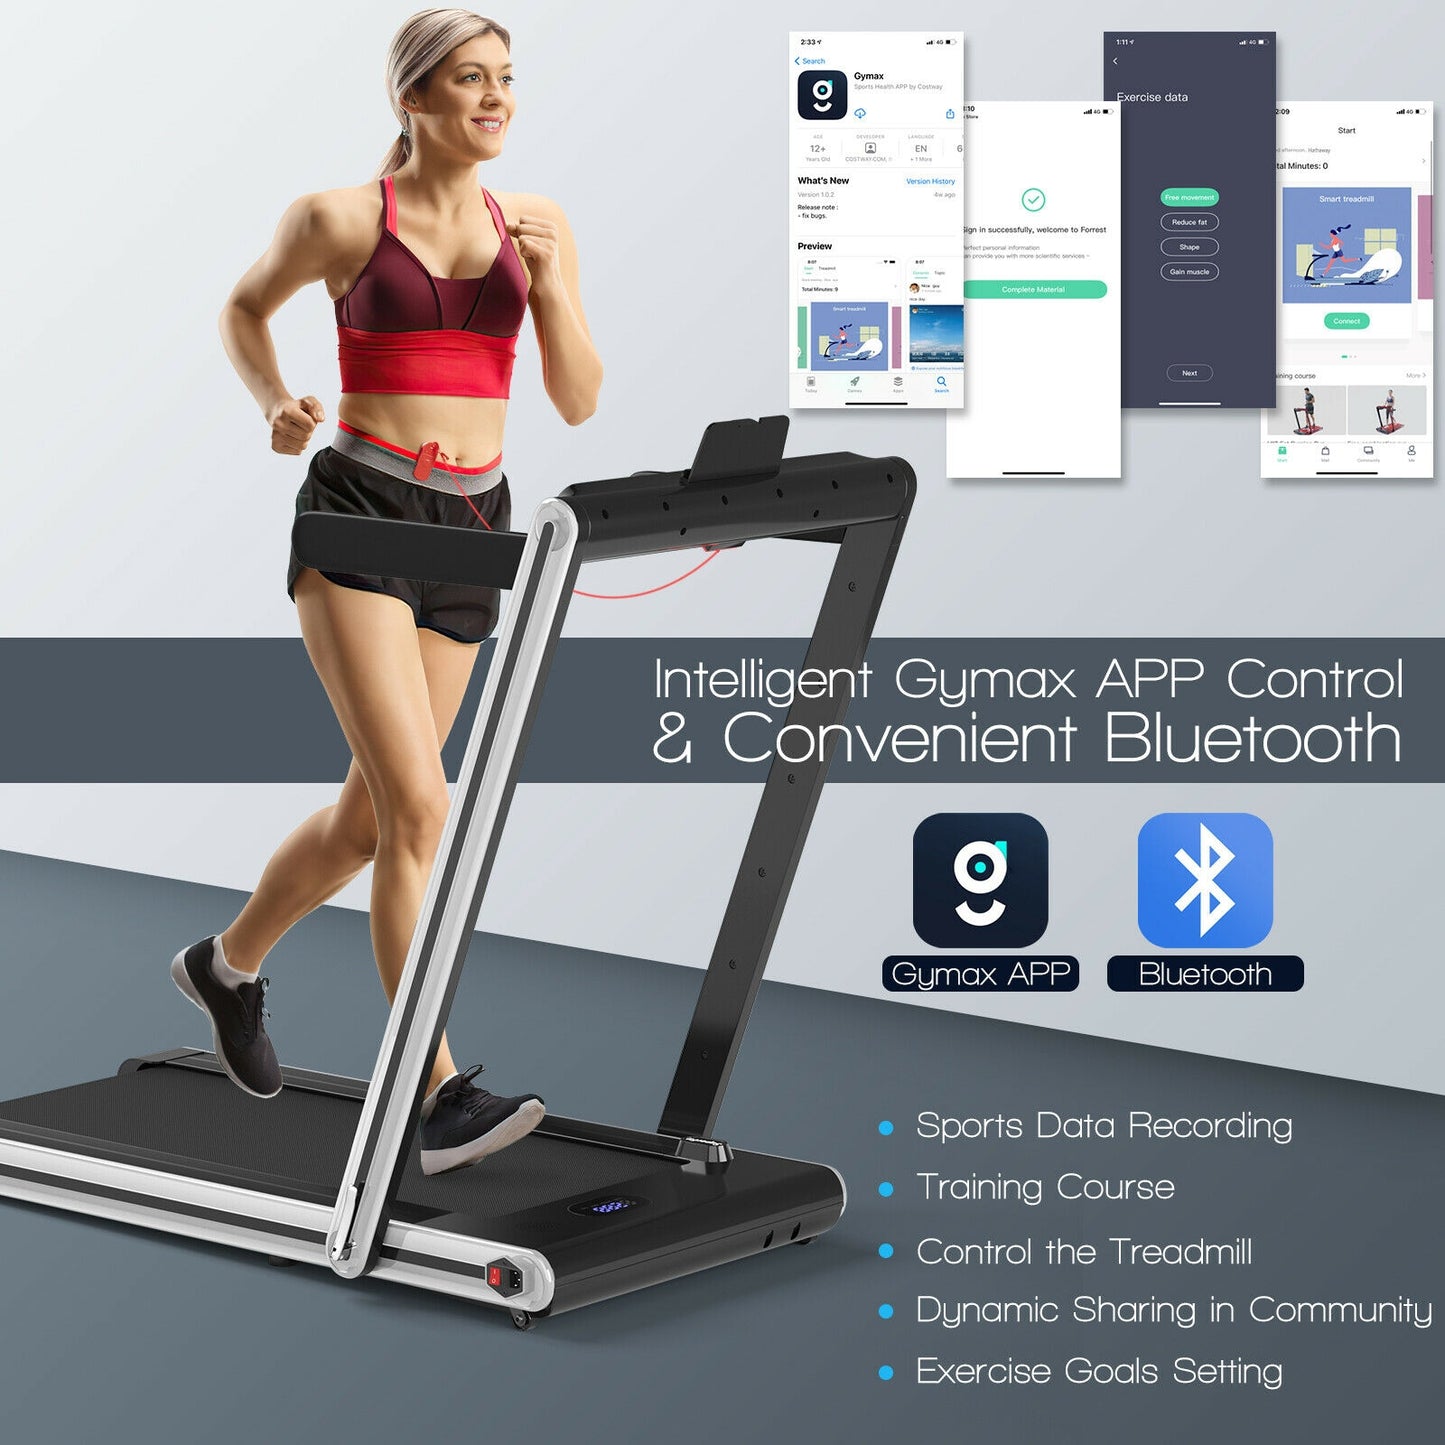 2-in-1 Folding Treadmill 2.25HP Jogging Machine with Dual LED Display-Silver